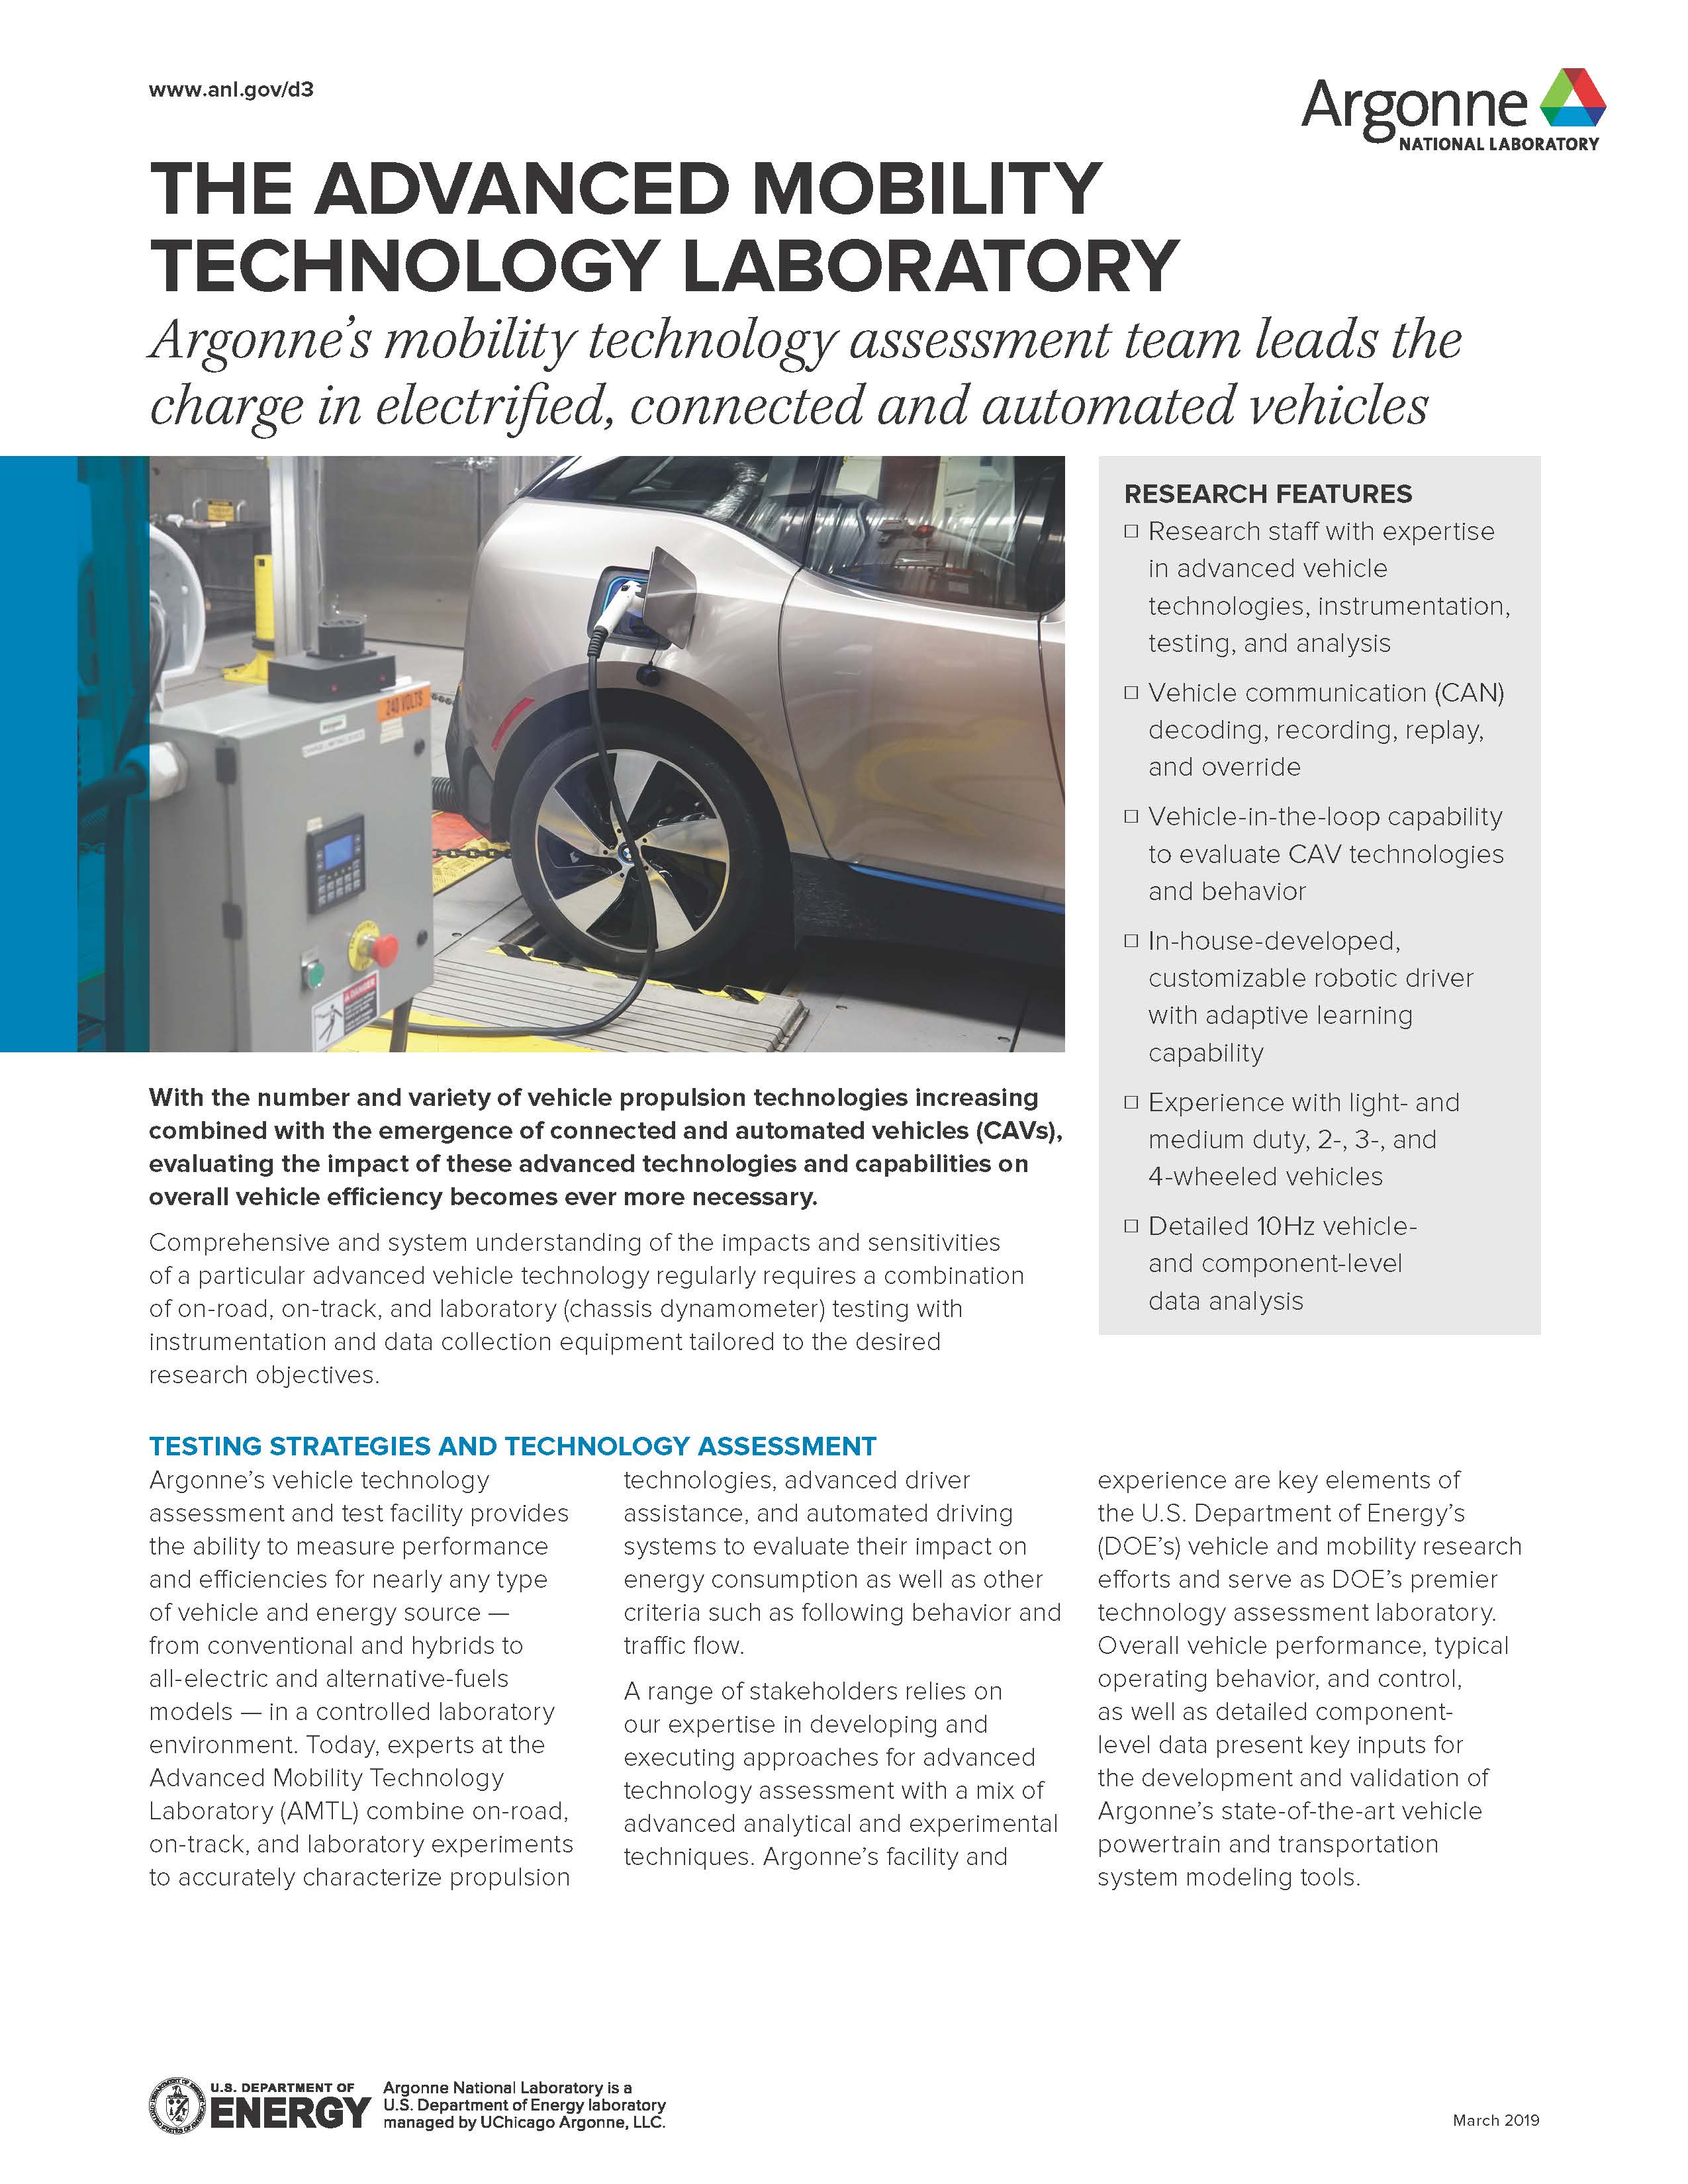 image of the front page of the Advanced Mobility Technology Laboratory fact sheet